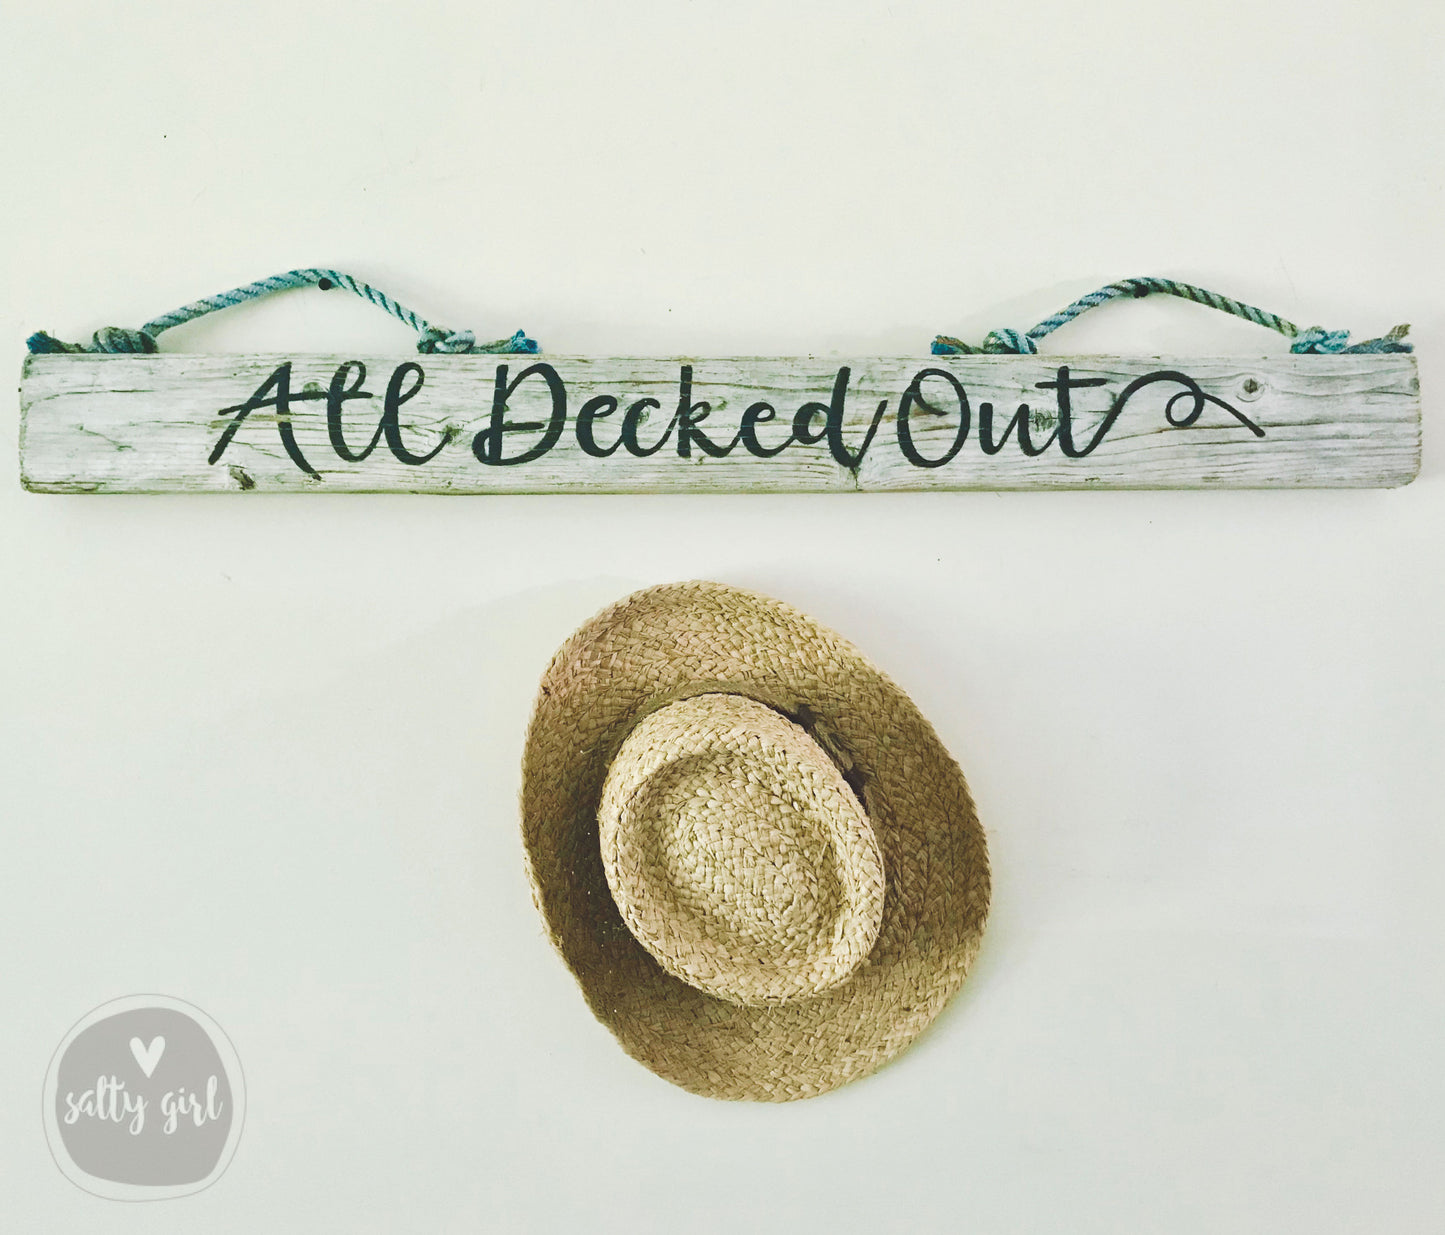 Custom Driftwood Sign - Personalized Wooden Sign with Fishing Rope Hanger - Hand Painted Wooden Sign - Coastal Decor